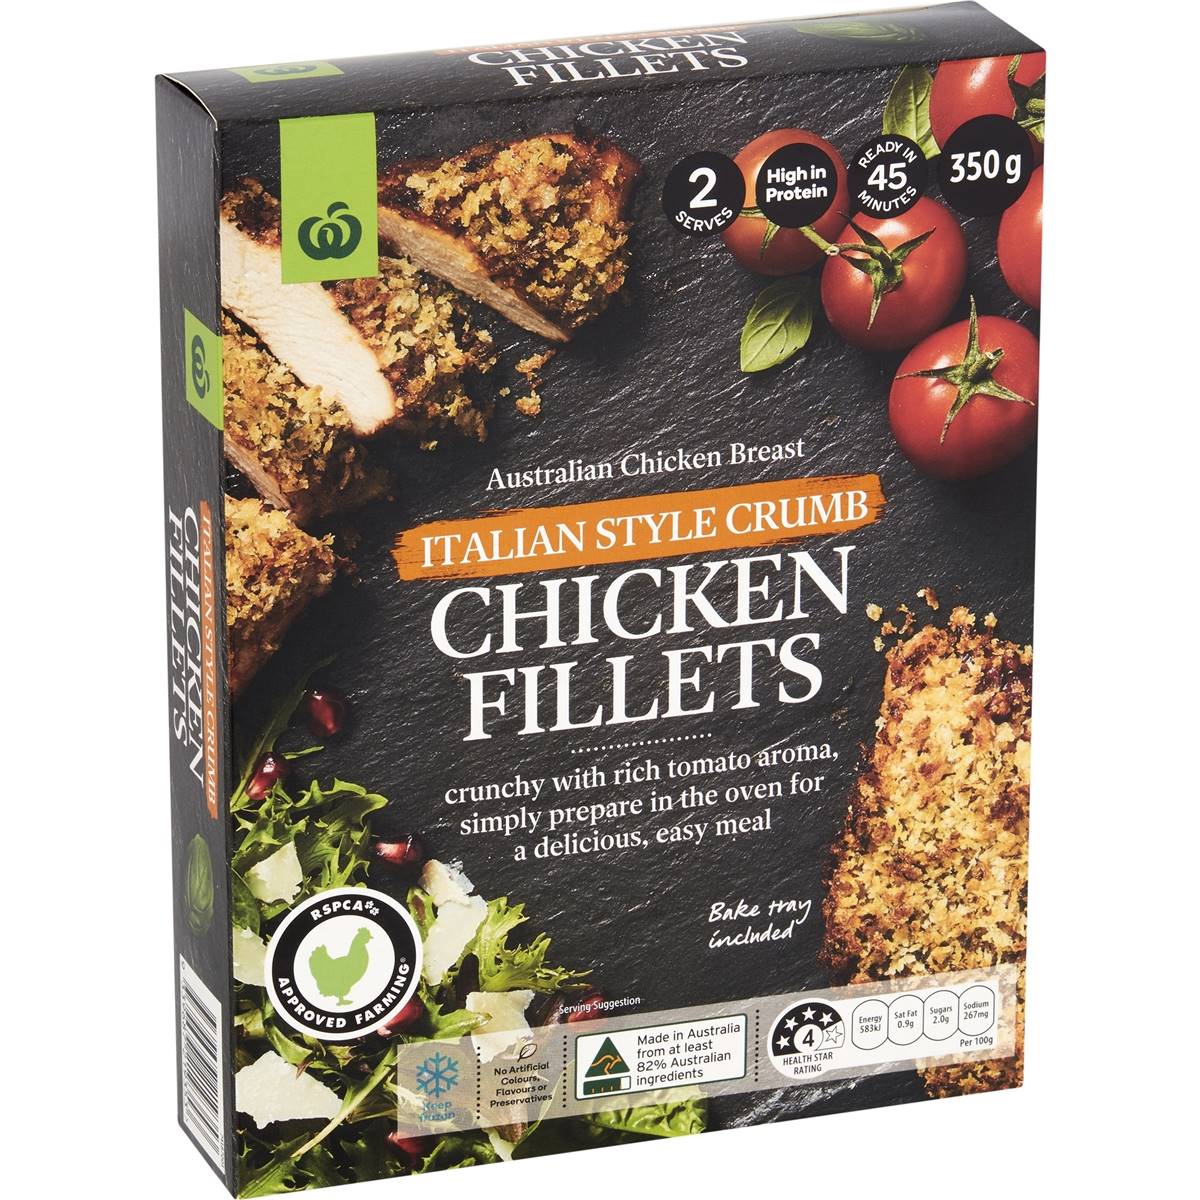 Calories in Woolworths Italian Style Crumb Chicken Fillets